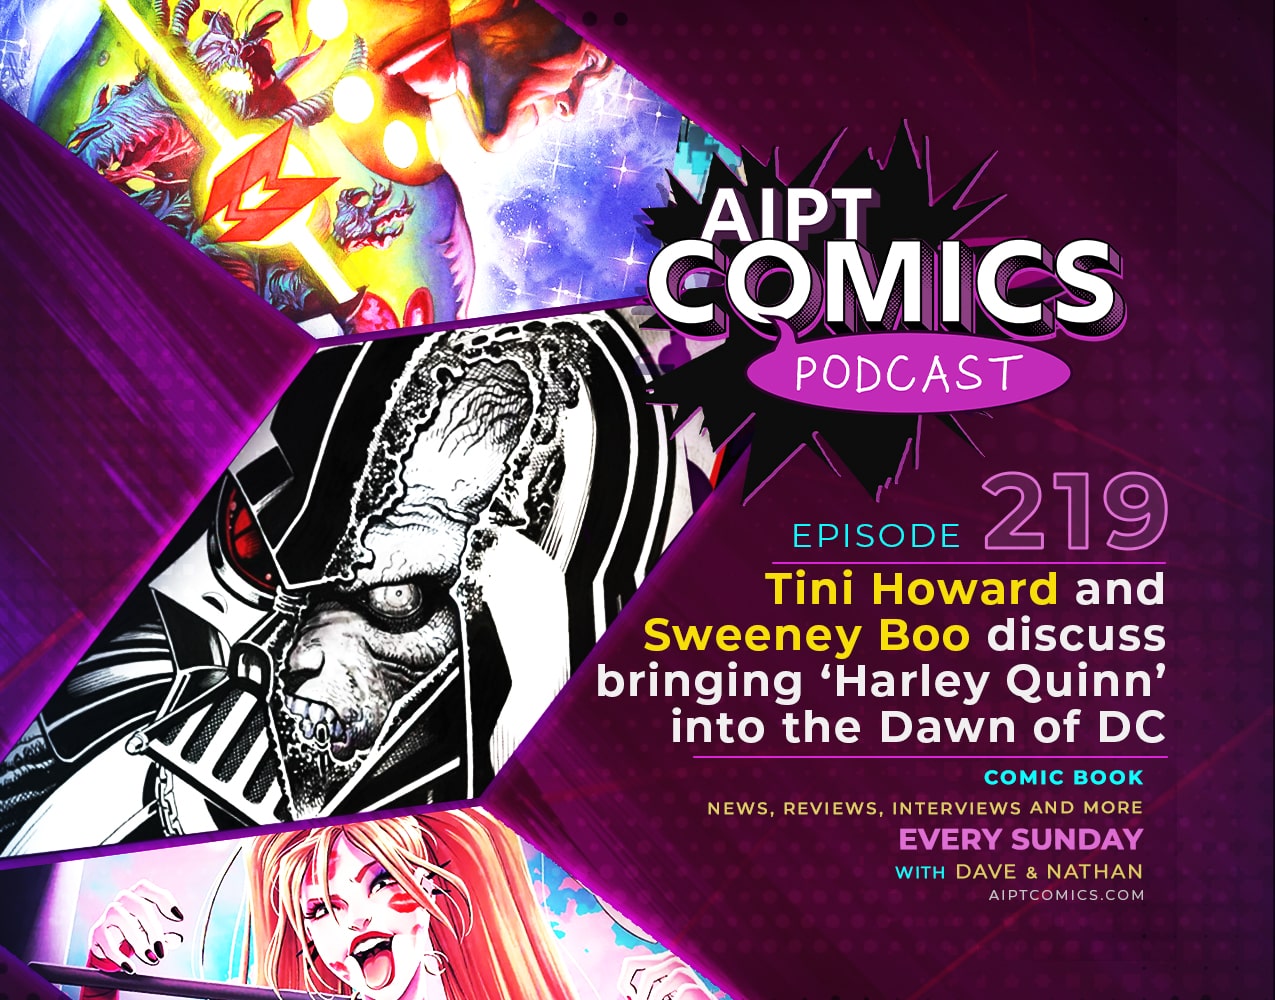 AIPT Comics Podcast episode 219: Tini Howard and Sweeney Boo discuss bringing ‘Harley Quinn’ into the Dawn of DC